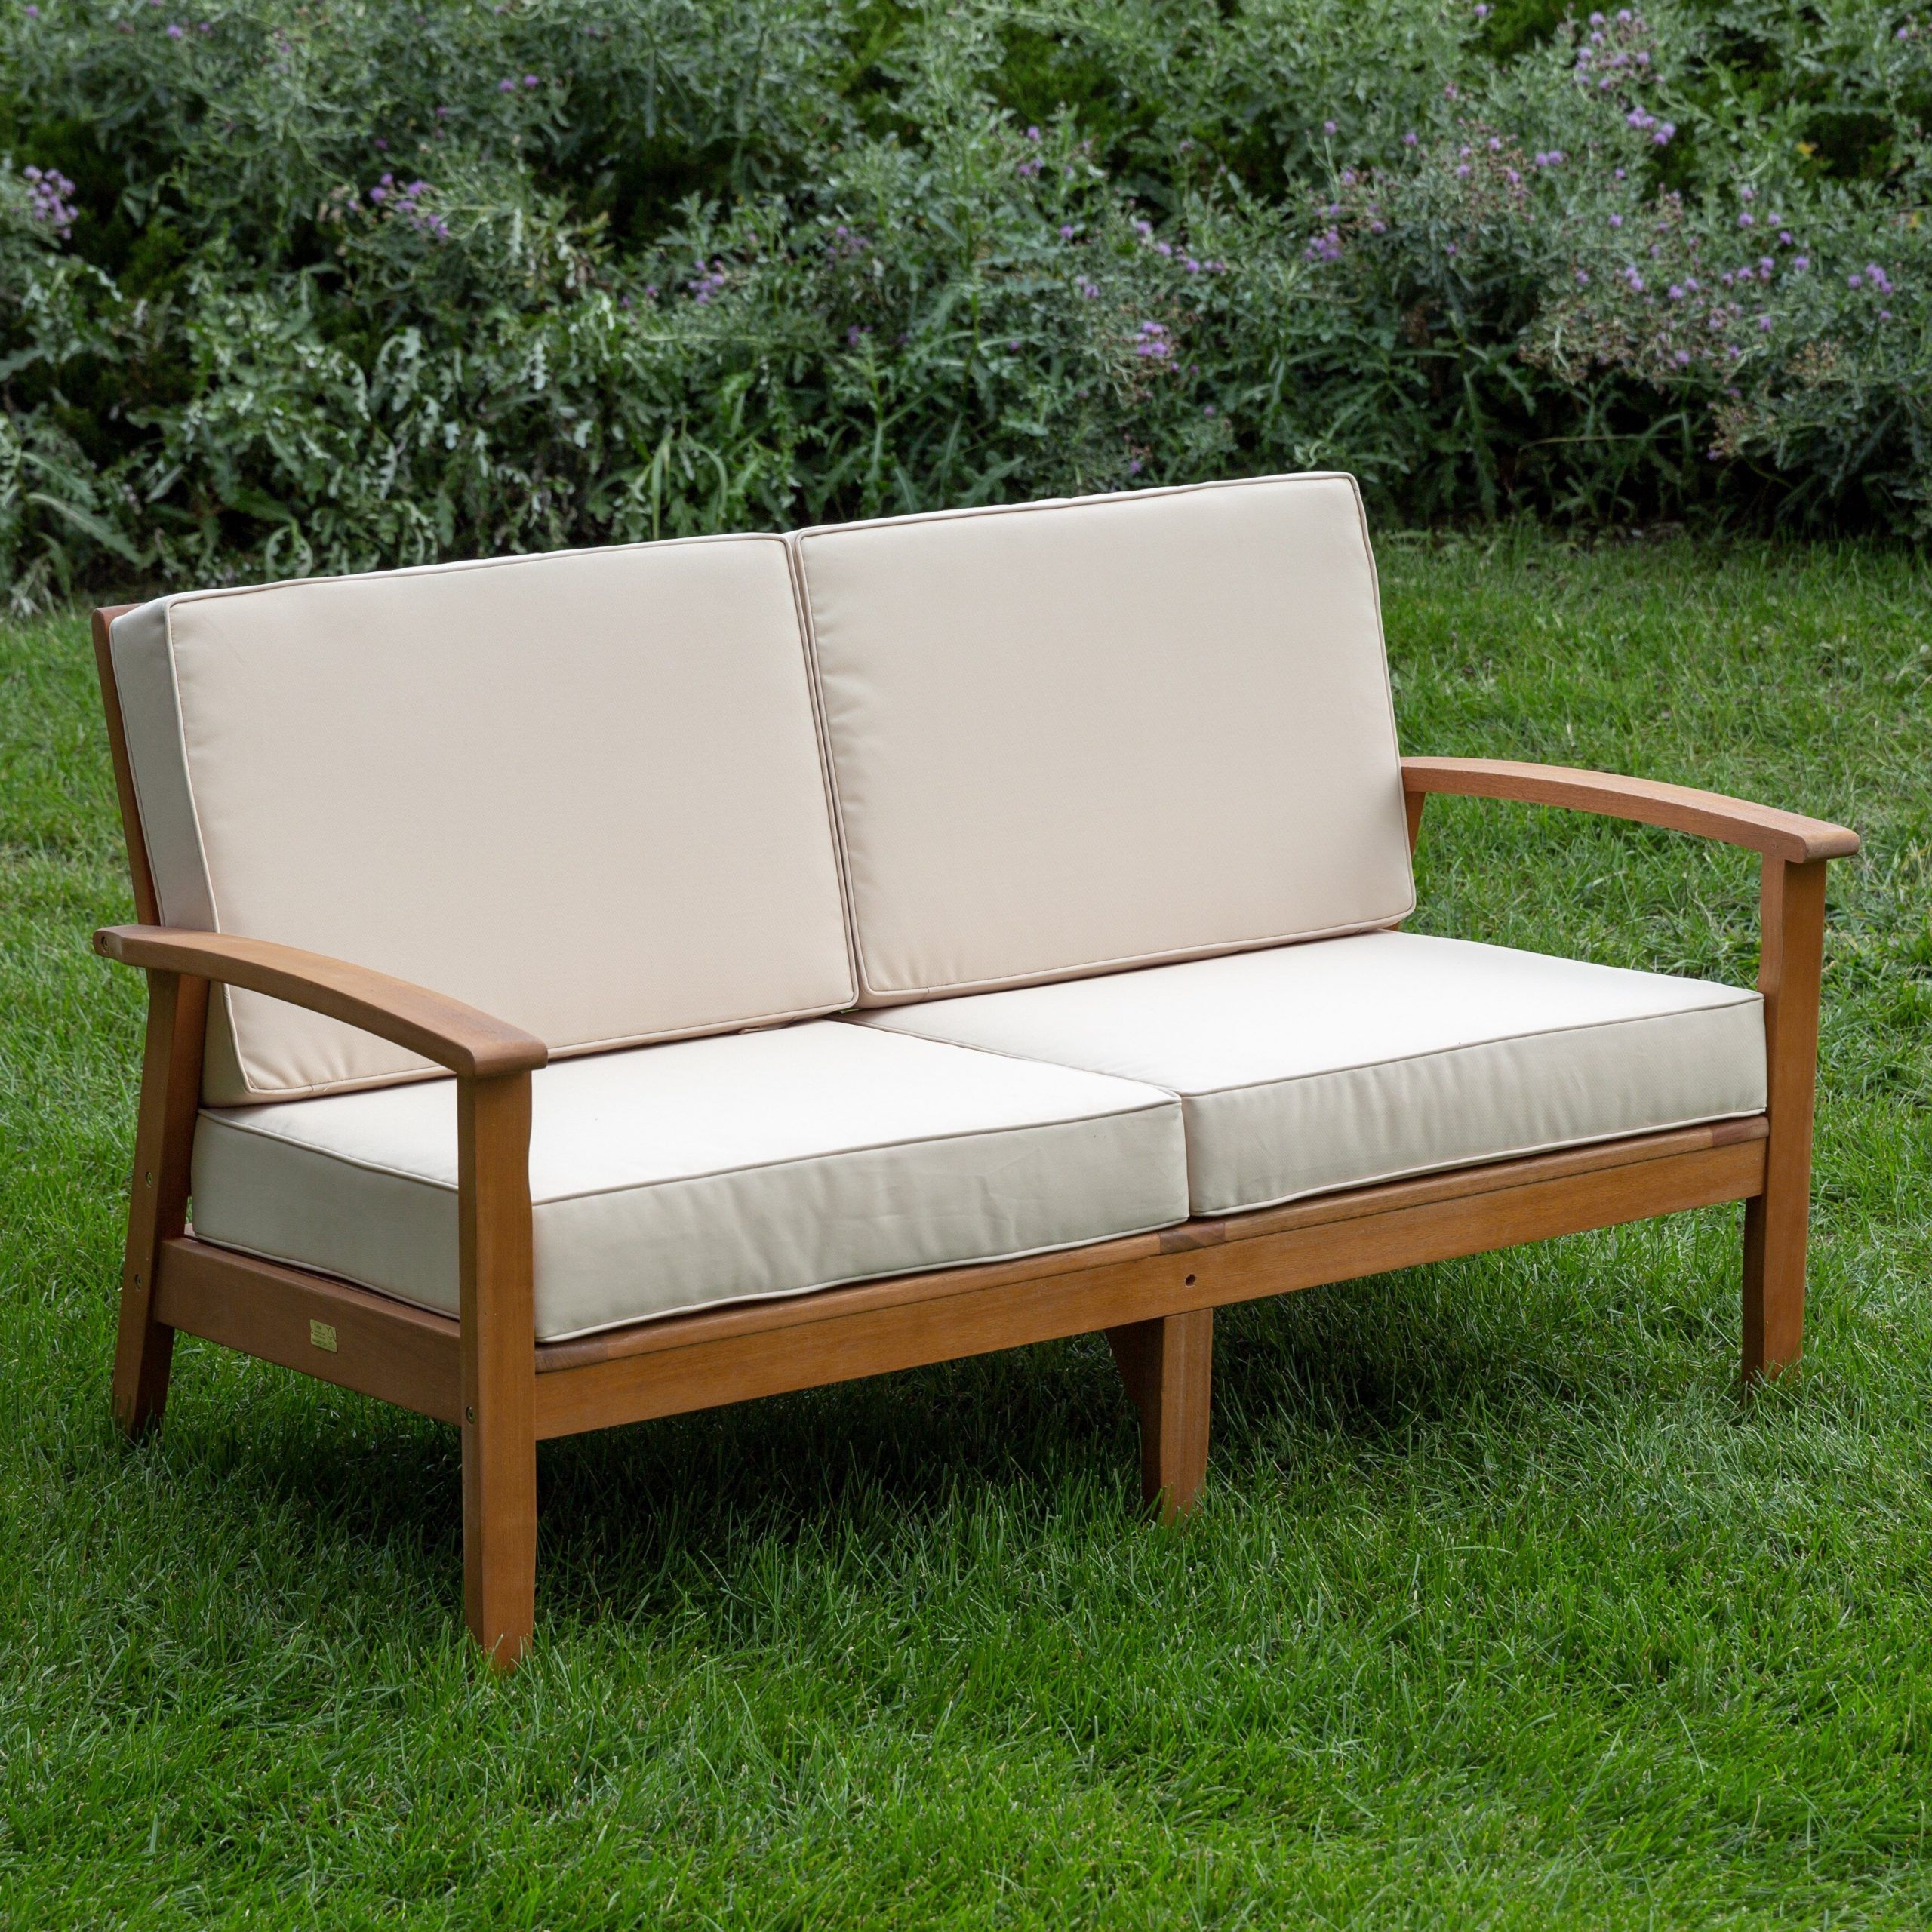 Most Recent Landis Loveseats With Cushions Regarding Buecker Loveseat With Cushions (View 8 of 25)